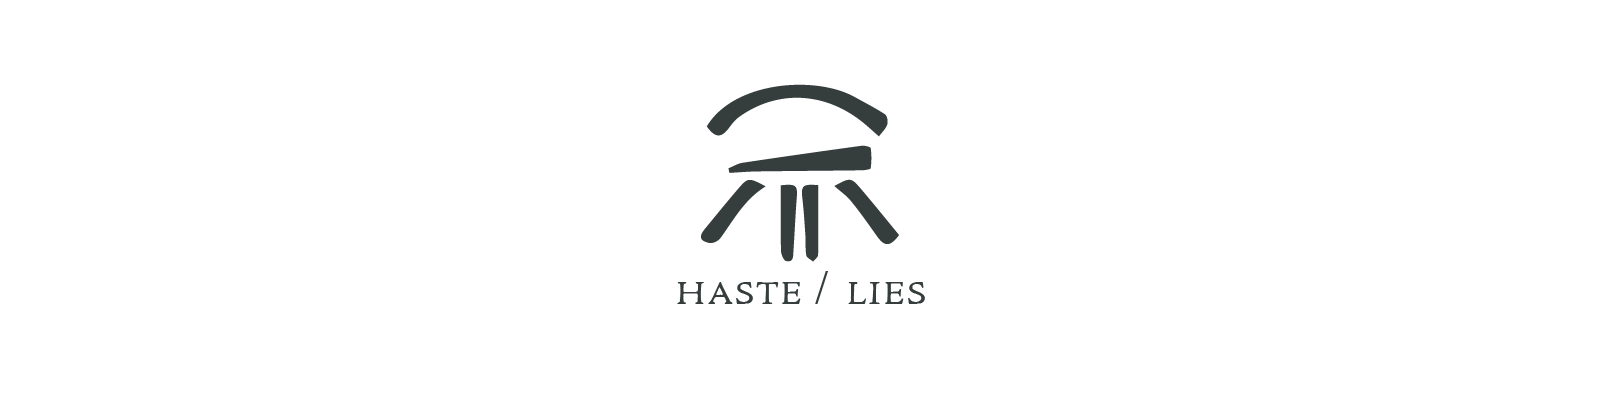 Hive rune meaning Haste/Lies